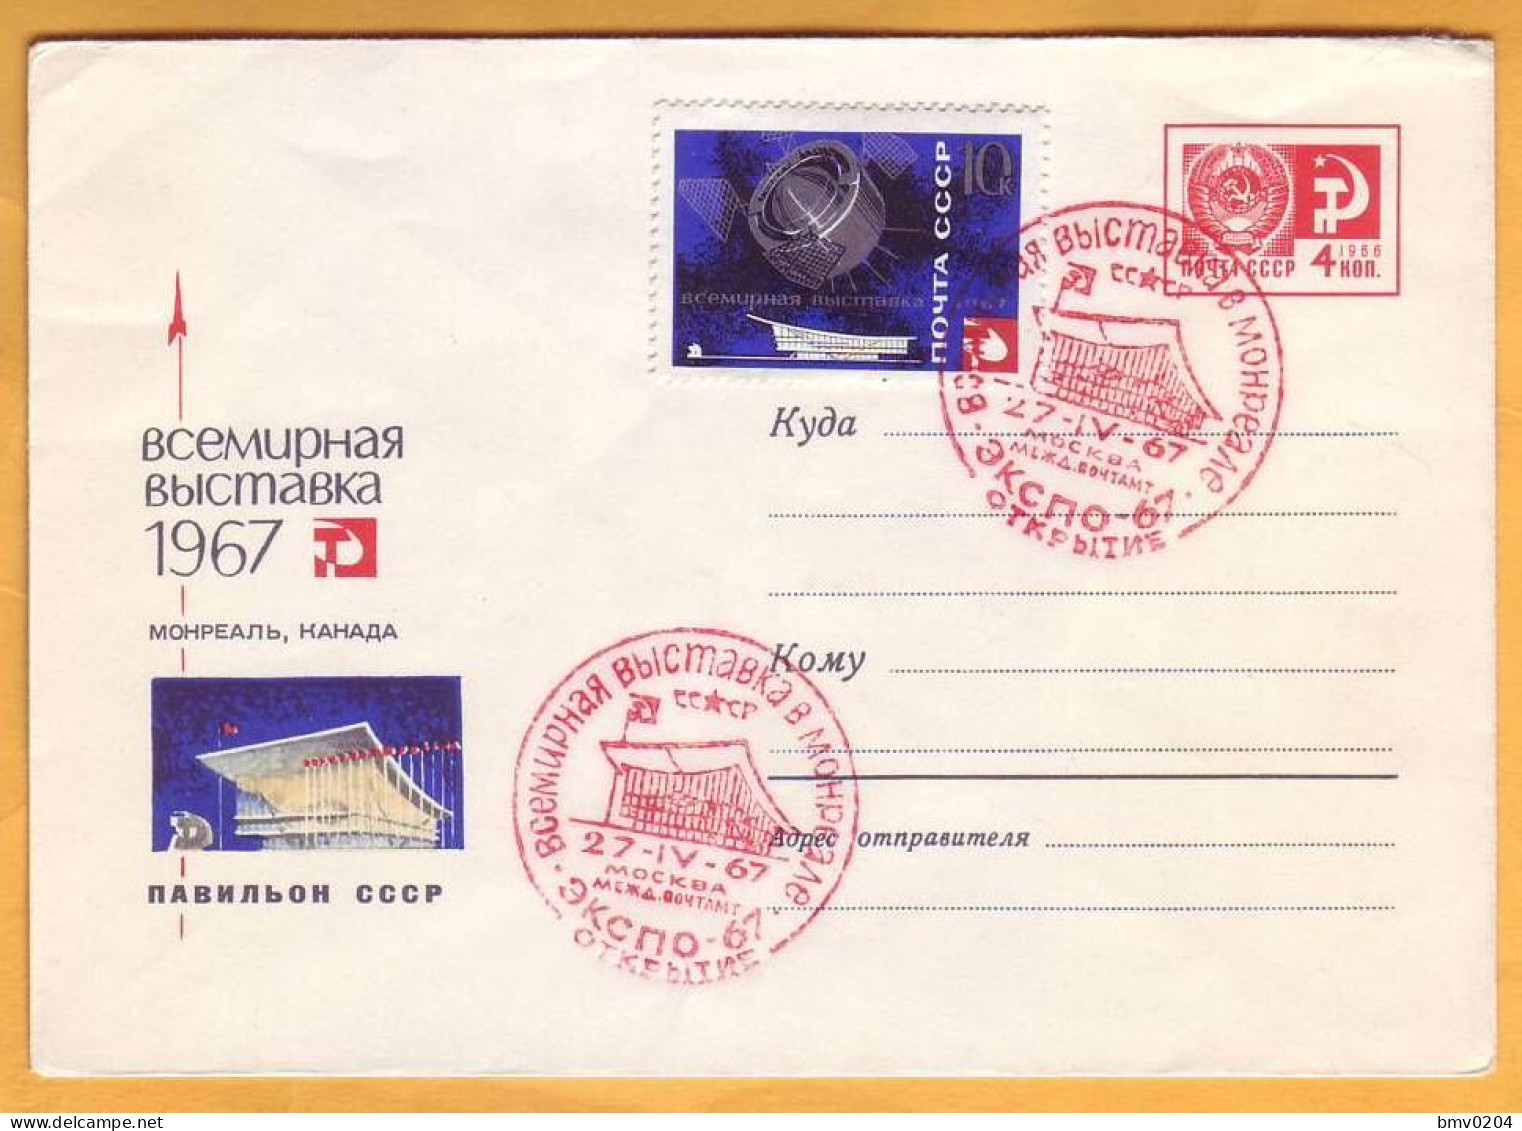 1967  RUSSIA RUSSIE USSR URSS  EXPO-67, Canada, Montreal  Rocket - 1960-69